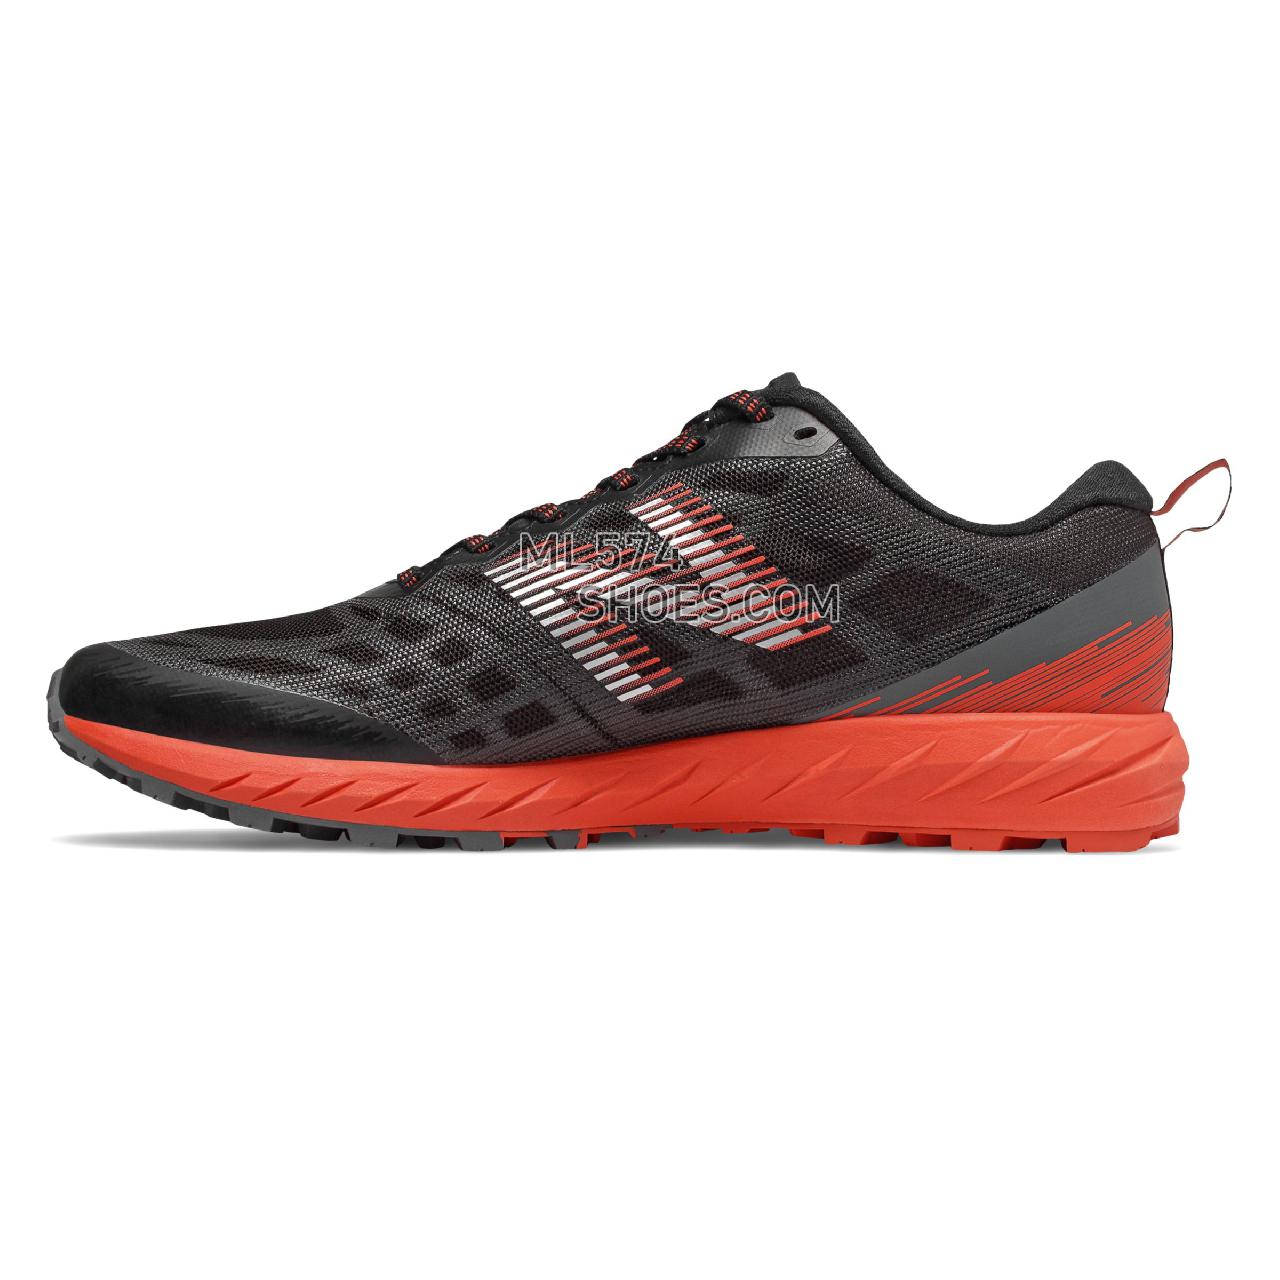 New Balance Summit Unknown GTX - Men's Trail Running - Black with Lead and Coral Glow - MTUNKNGT